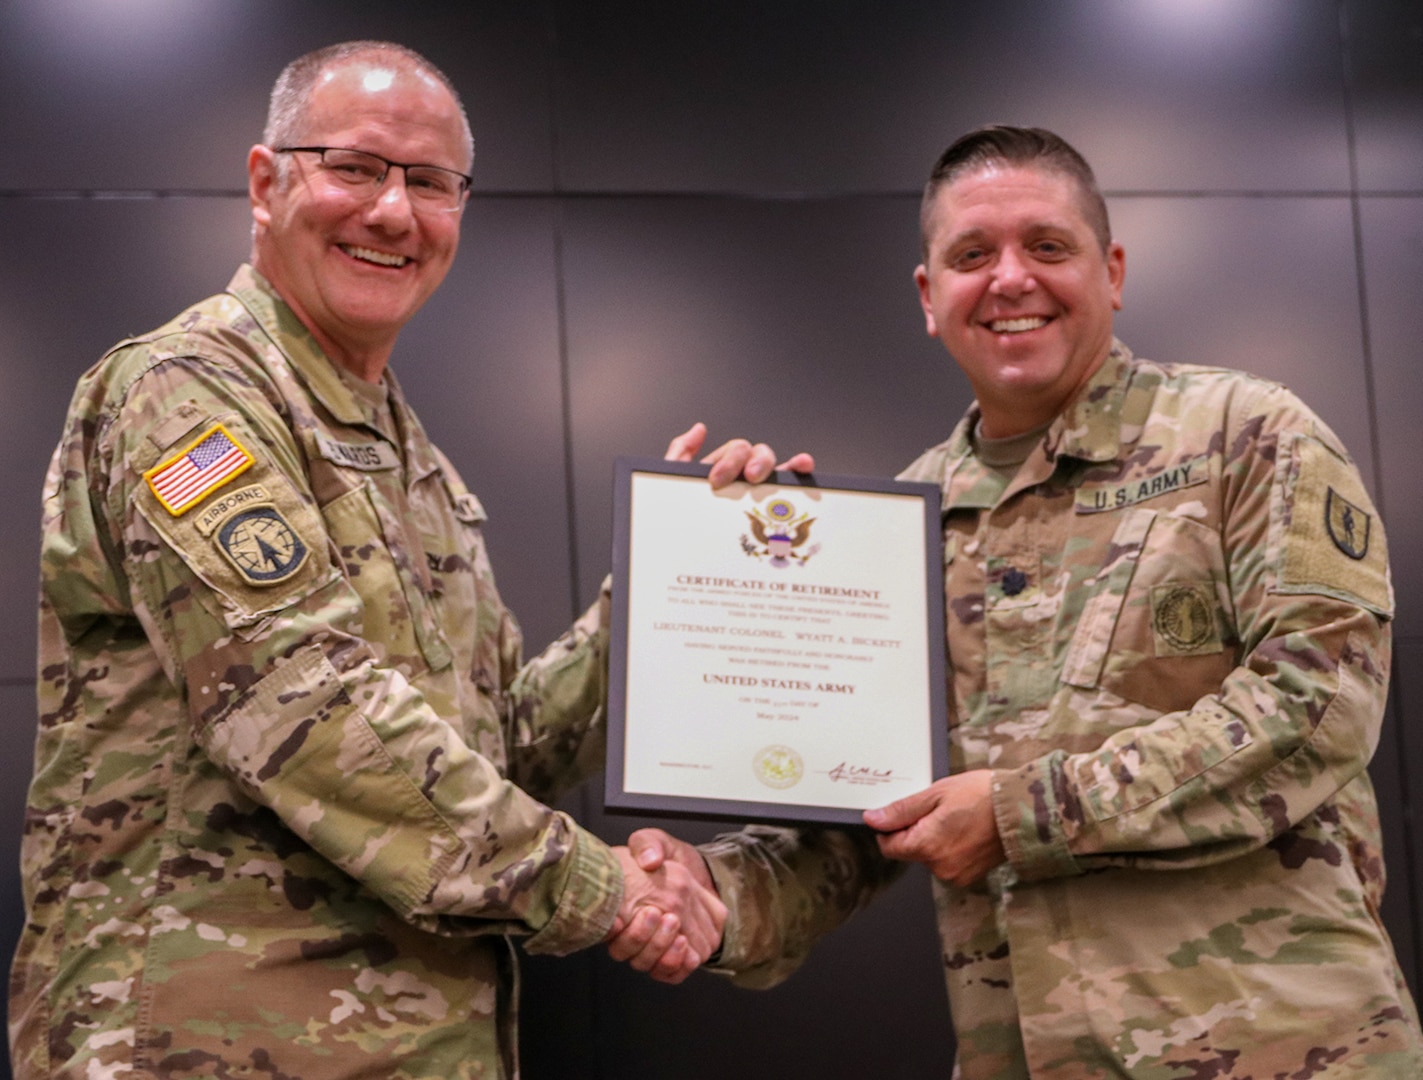 Lt. Col. Wyatt Bickett, of Smithton, officer in charge of the 129th Regiment (Regional Training Institute) is presented a certificate of retirement by Col. Randy Edwards, Chief of Staff, Illinois Army National Guard.